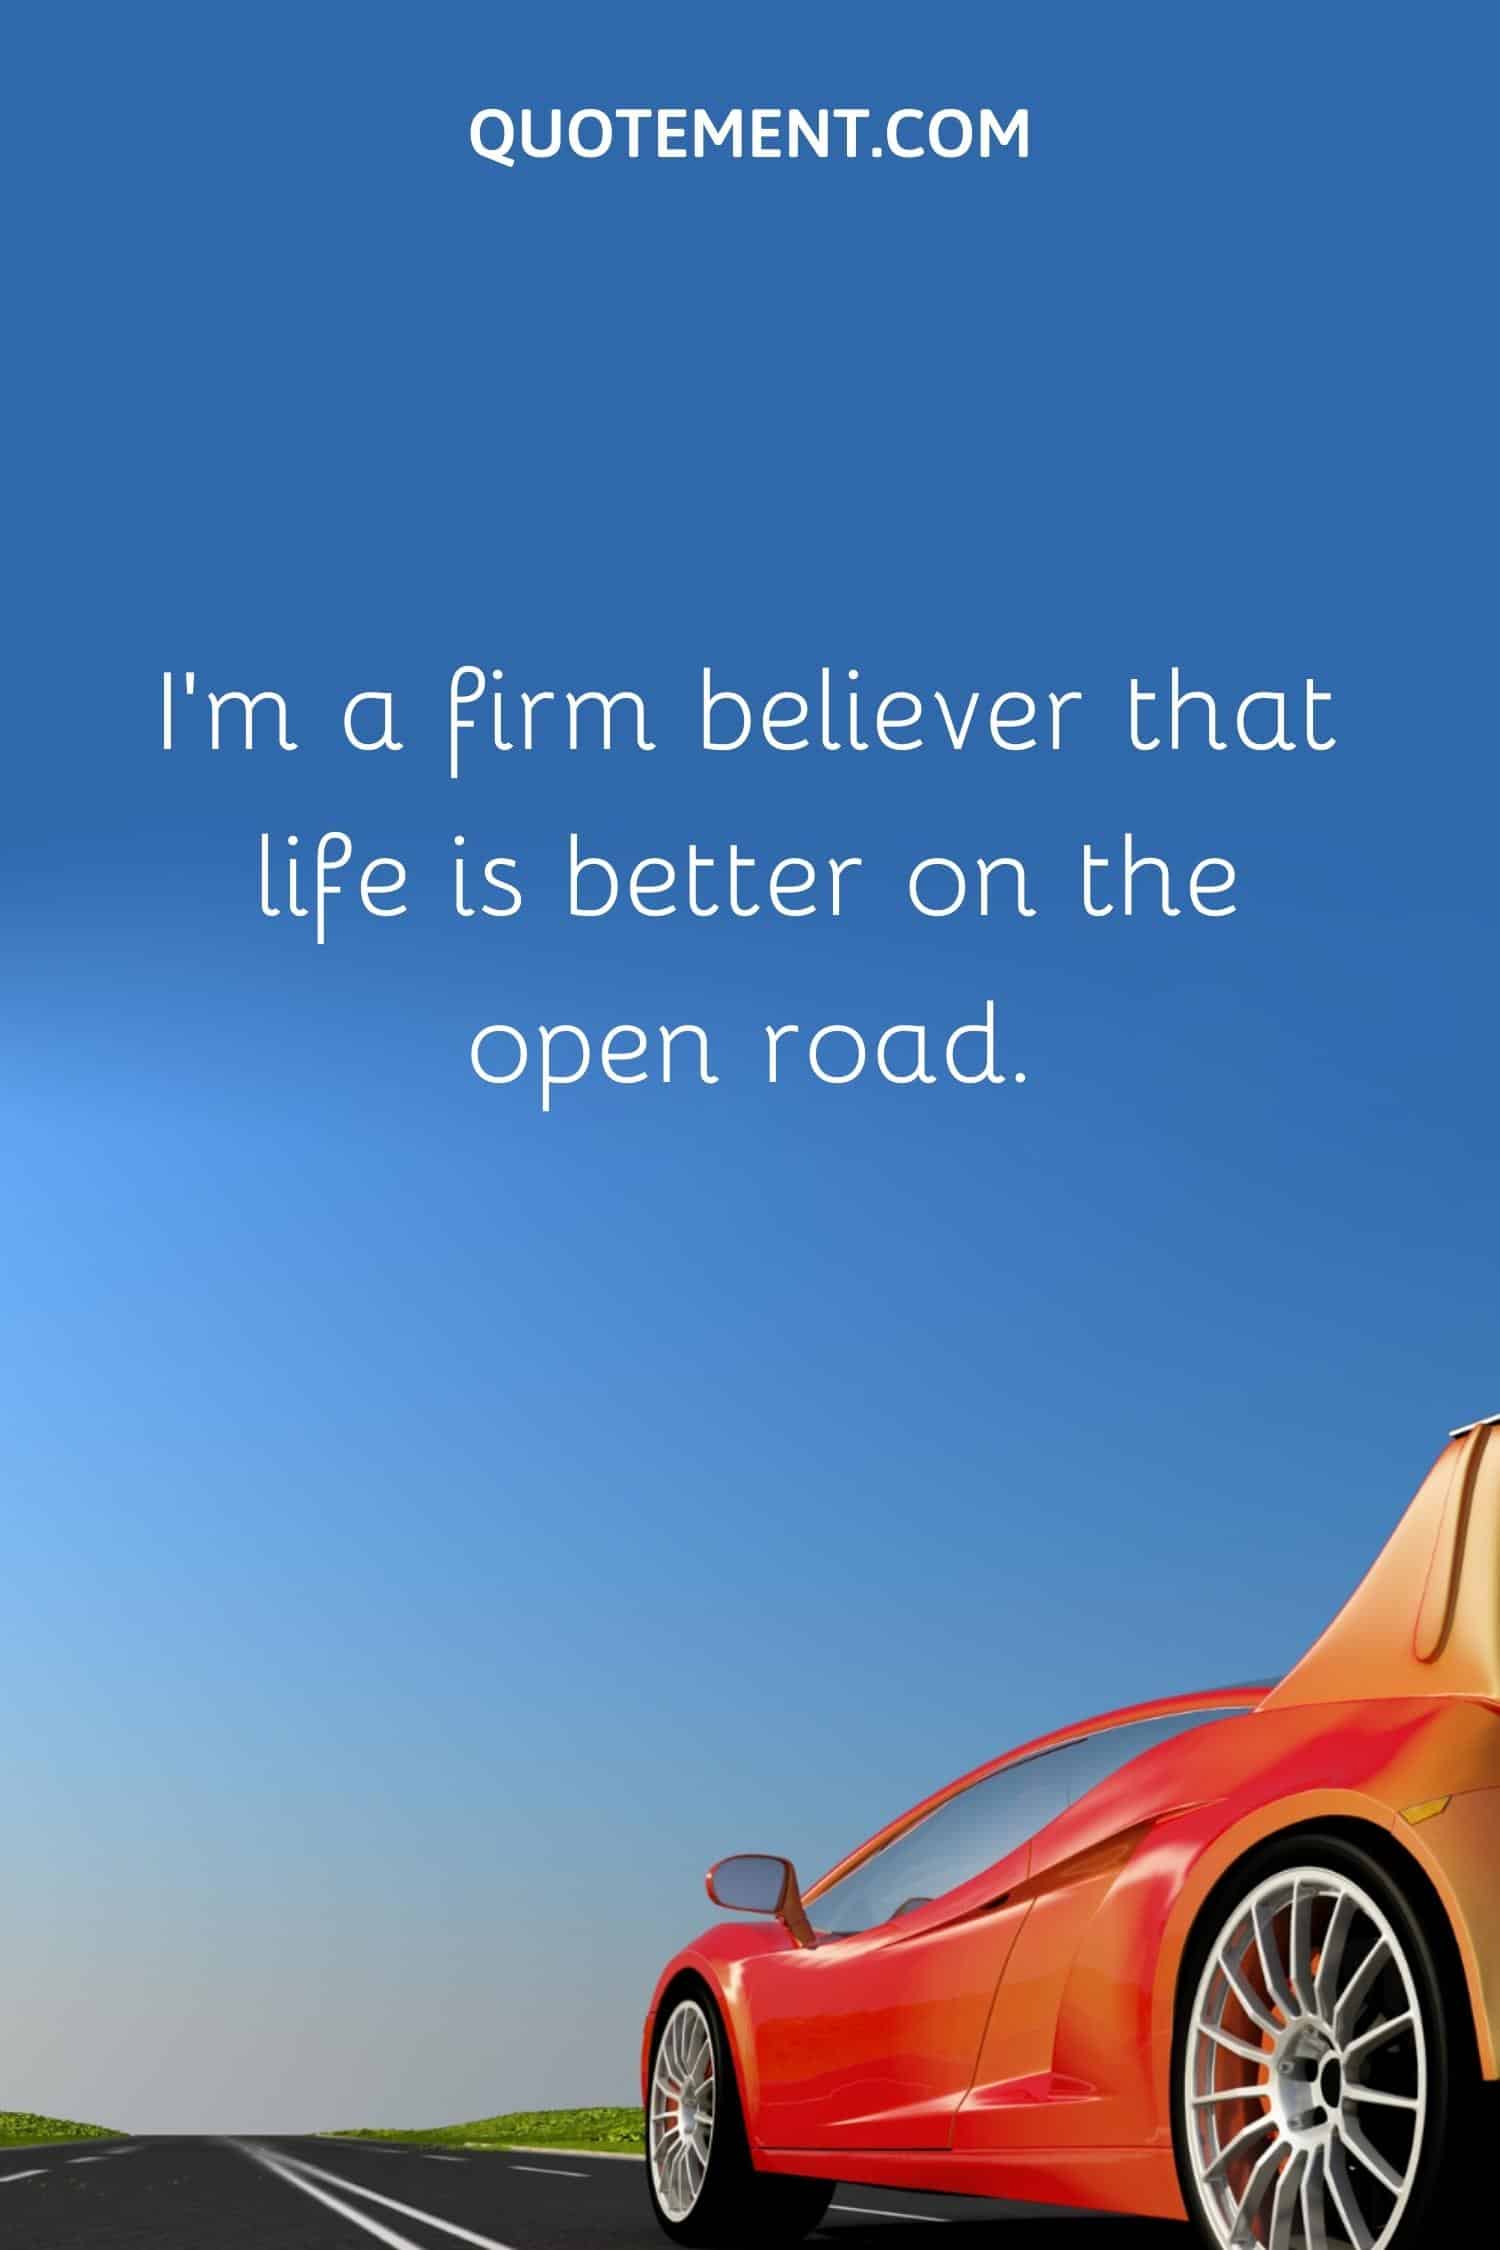 I'm a firm believer that life is better on the open road.